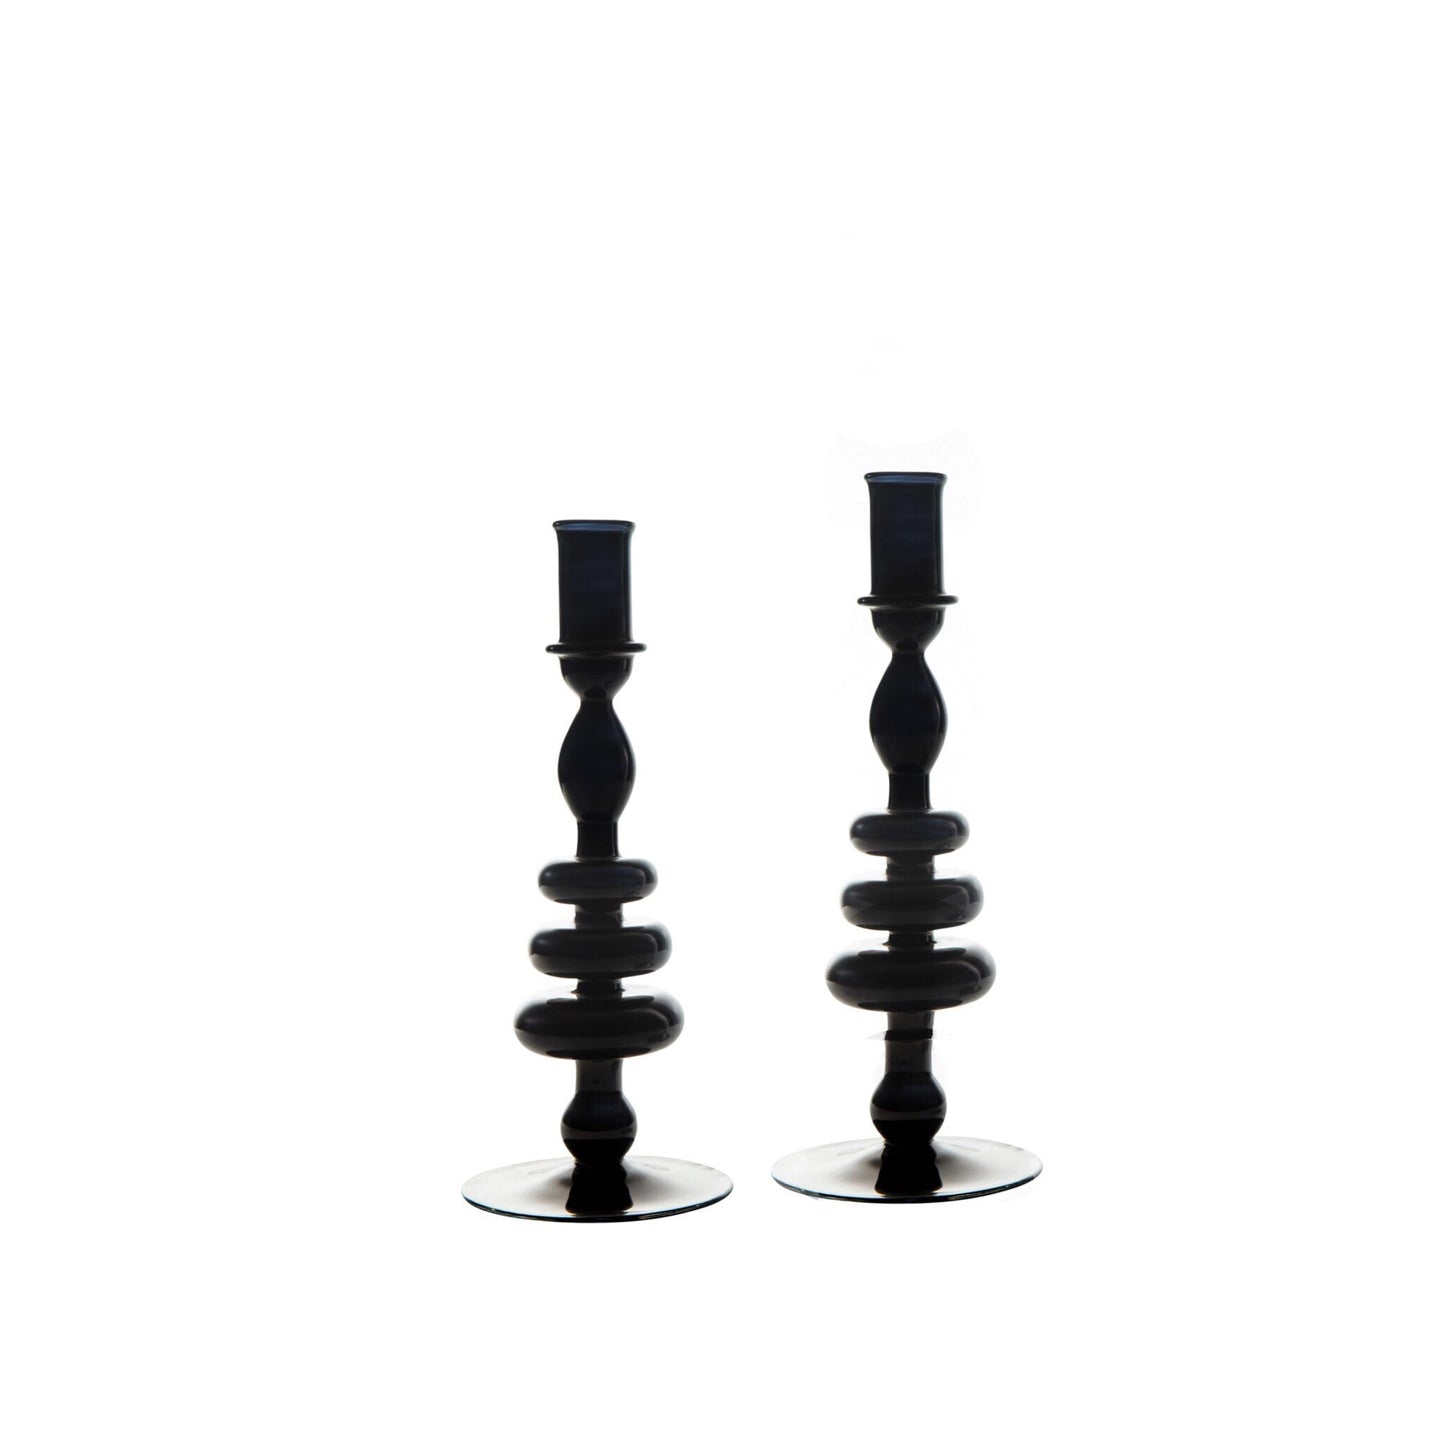 Set of 2 Handmade Bubble Glass Candle Stick Holders - Les Trois Pyramides 